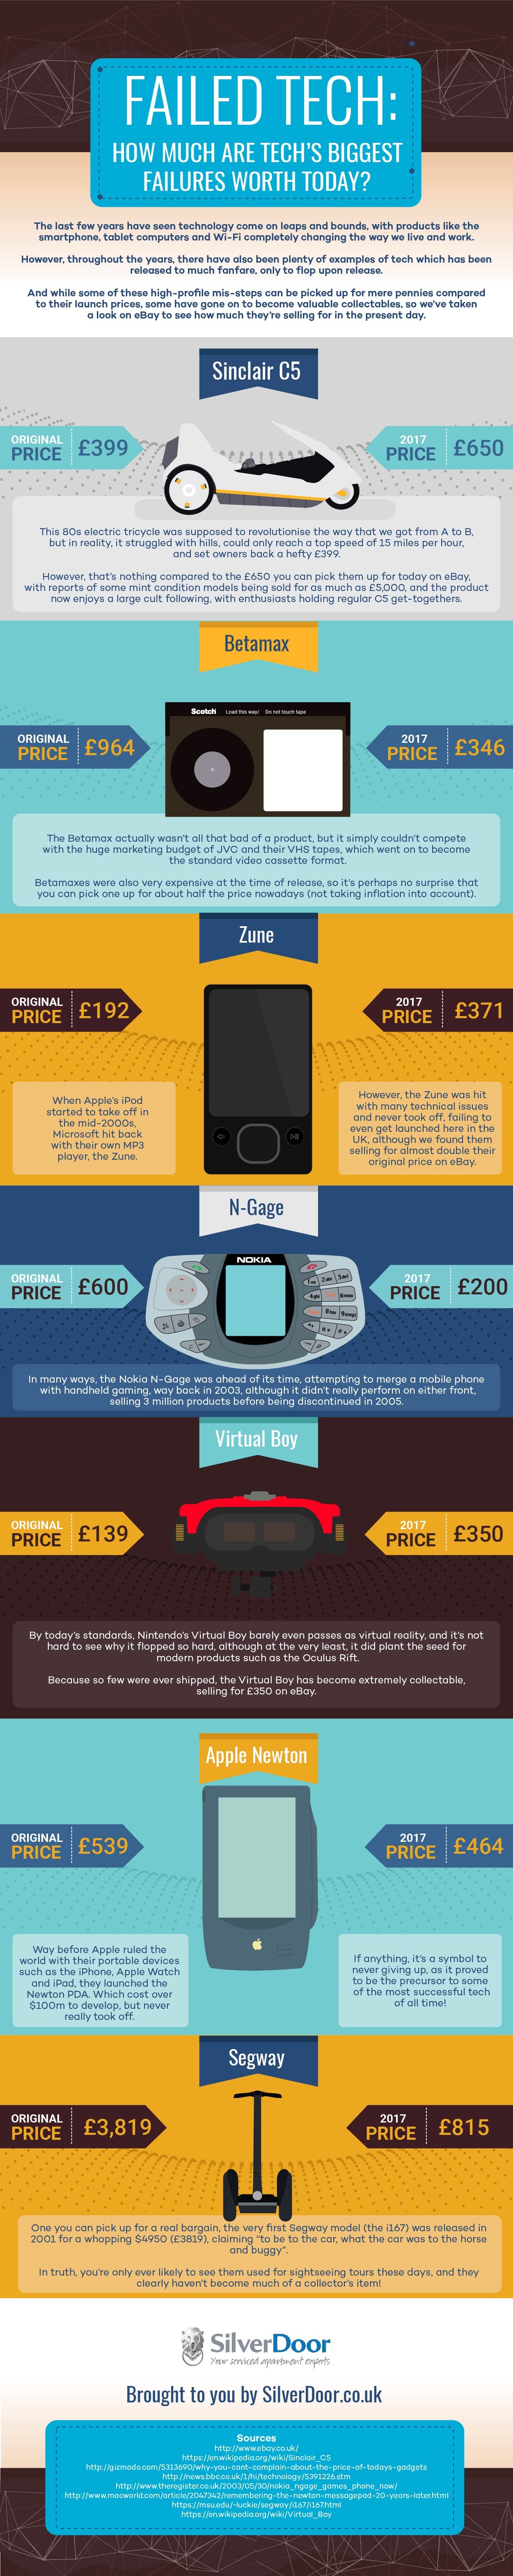 How Much Are Tech’s Biggest Failures Worth Today? #Infographic